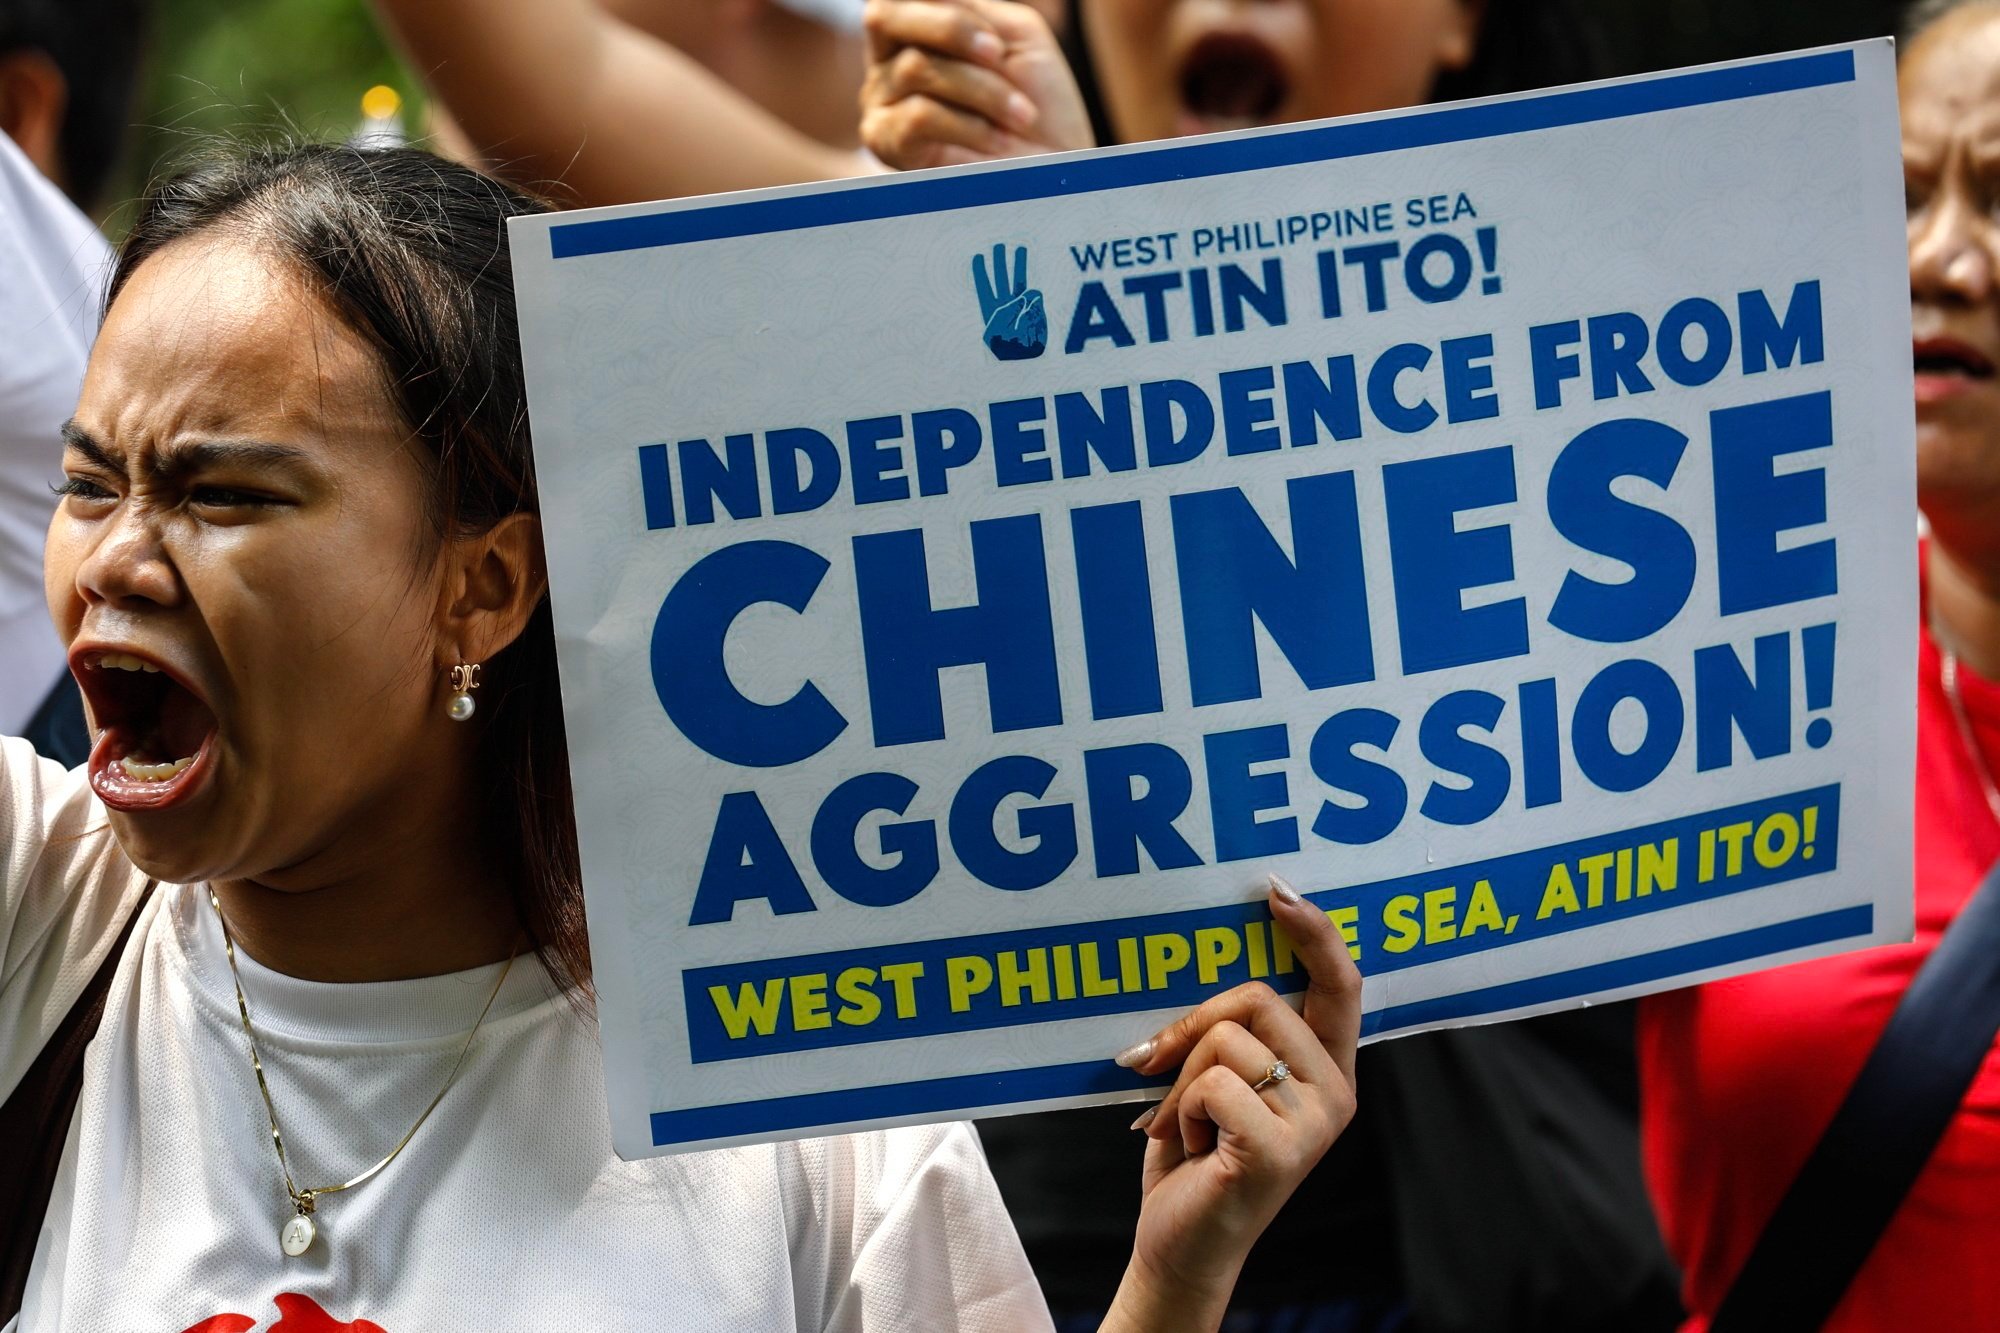 A protester chants anti-China slogans during a protest in Metro Manila on June 11. Photo: EPA-EFE